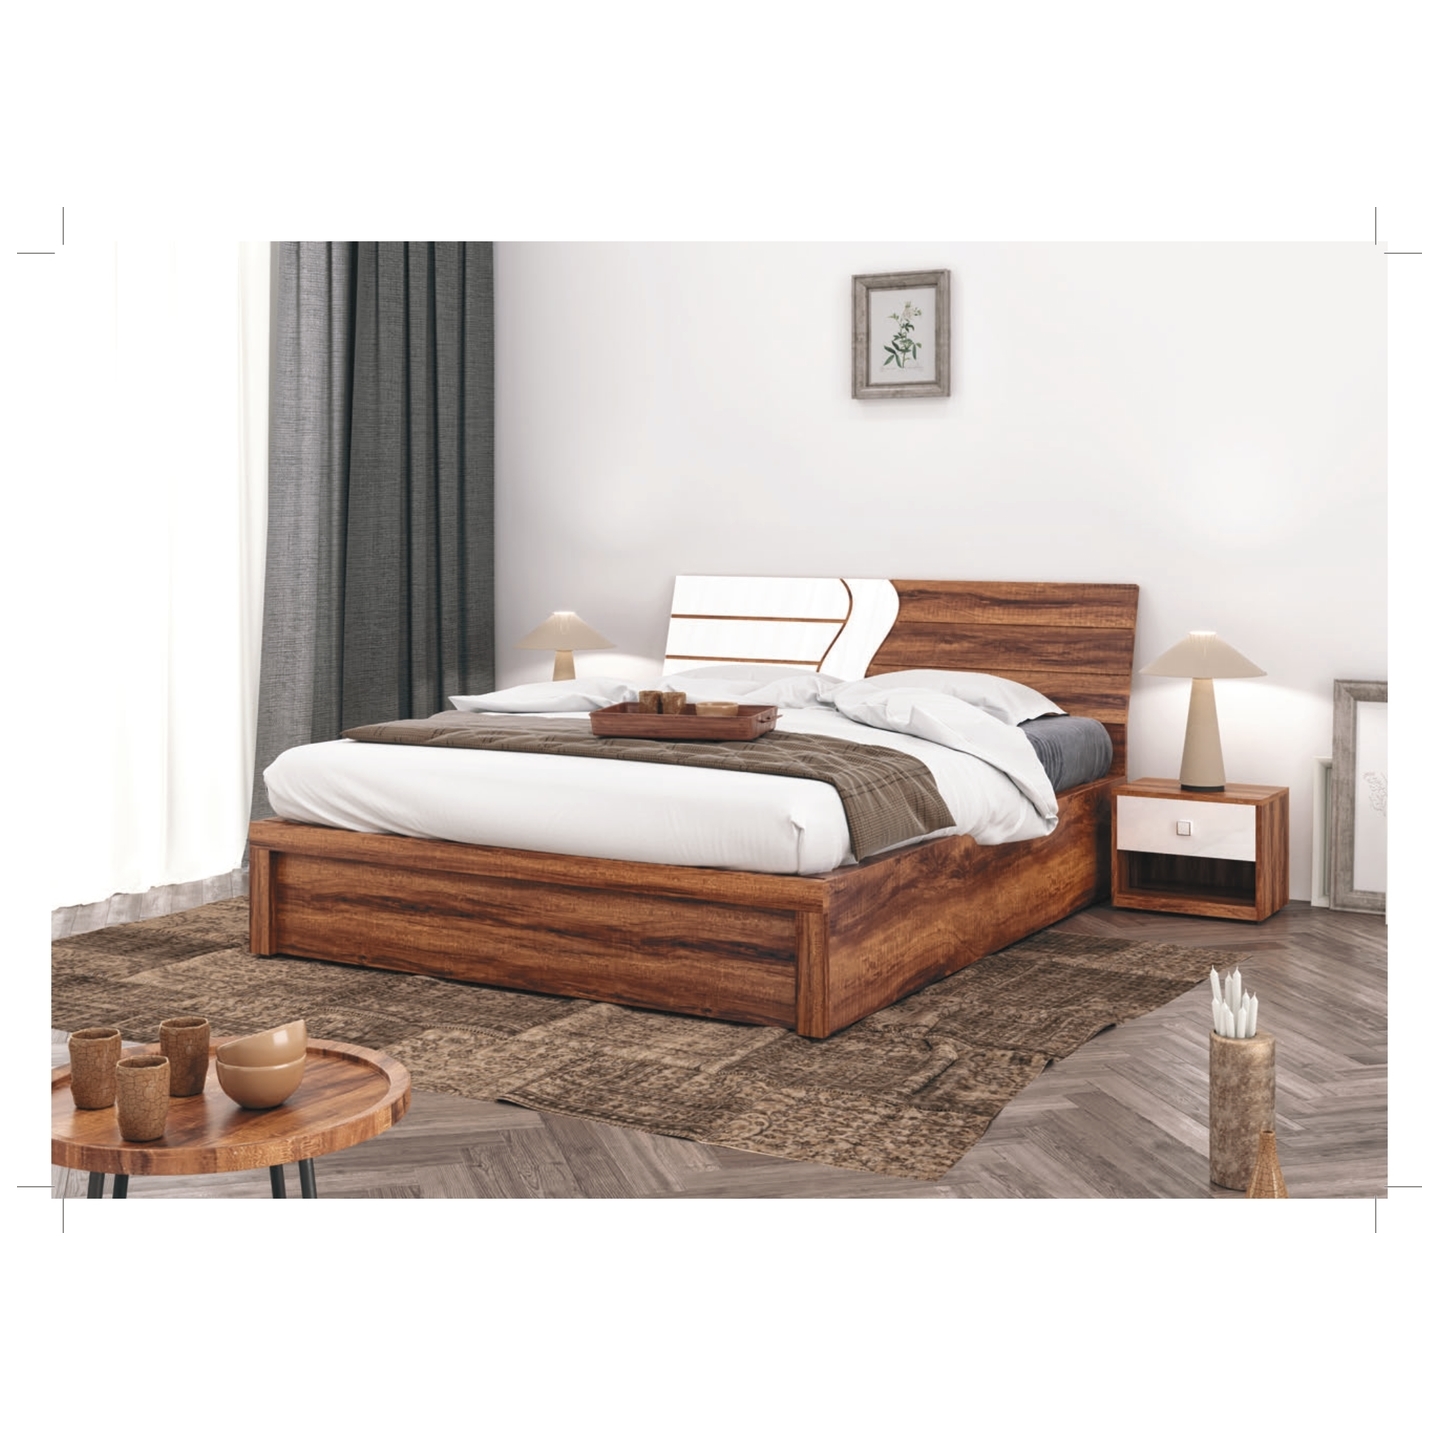 RLF Queen Size Bed 78x60 Modis In Brown Colour